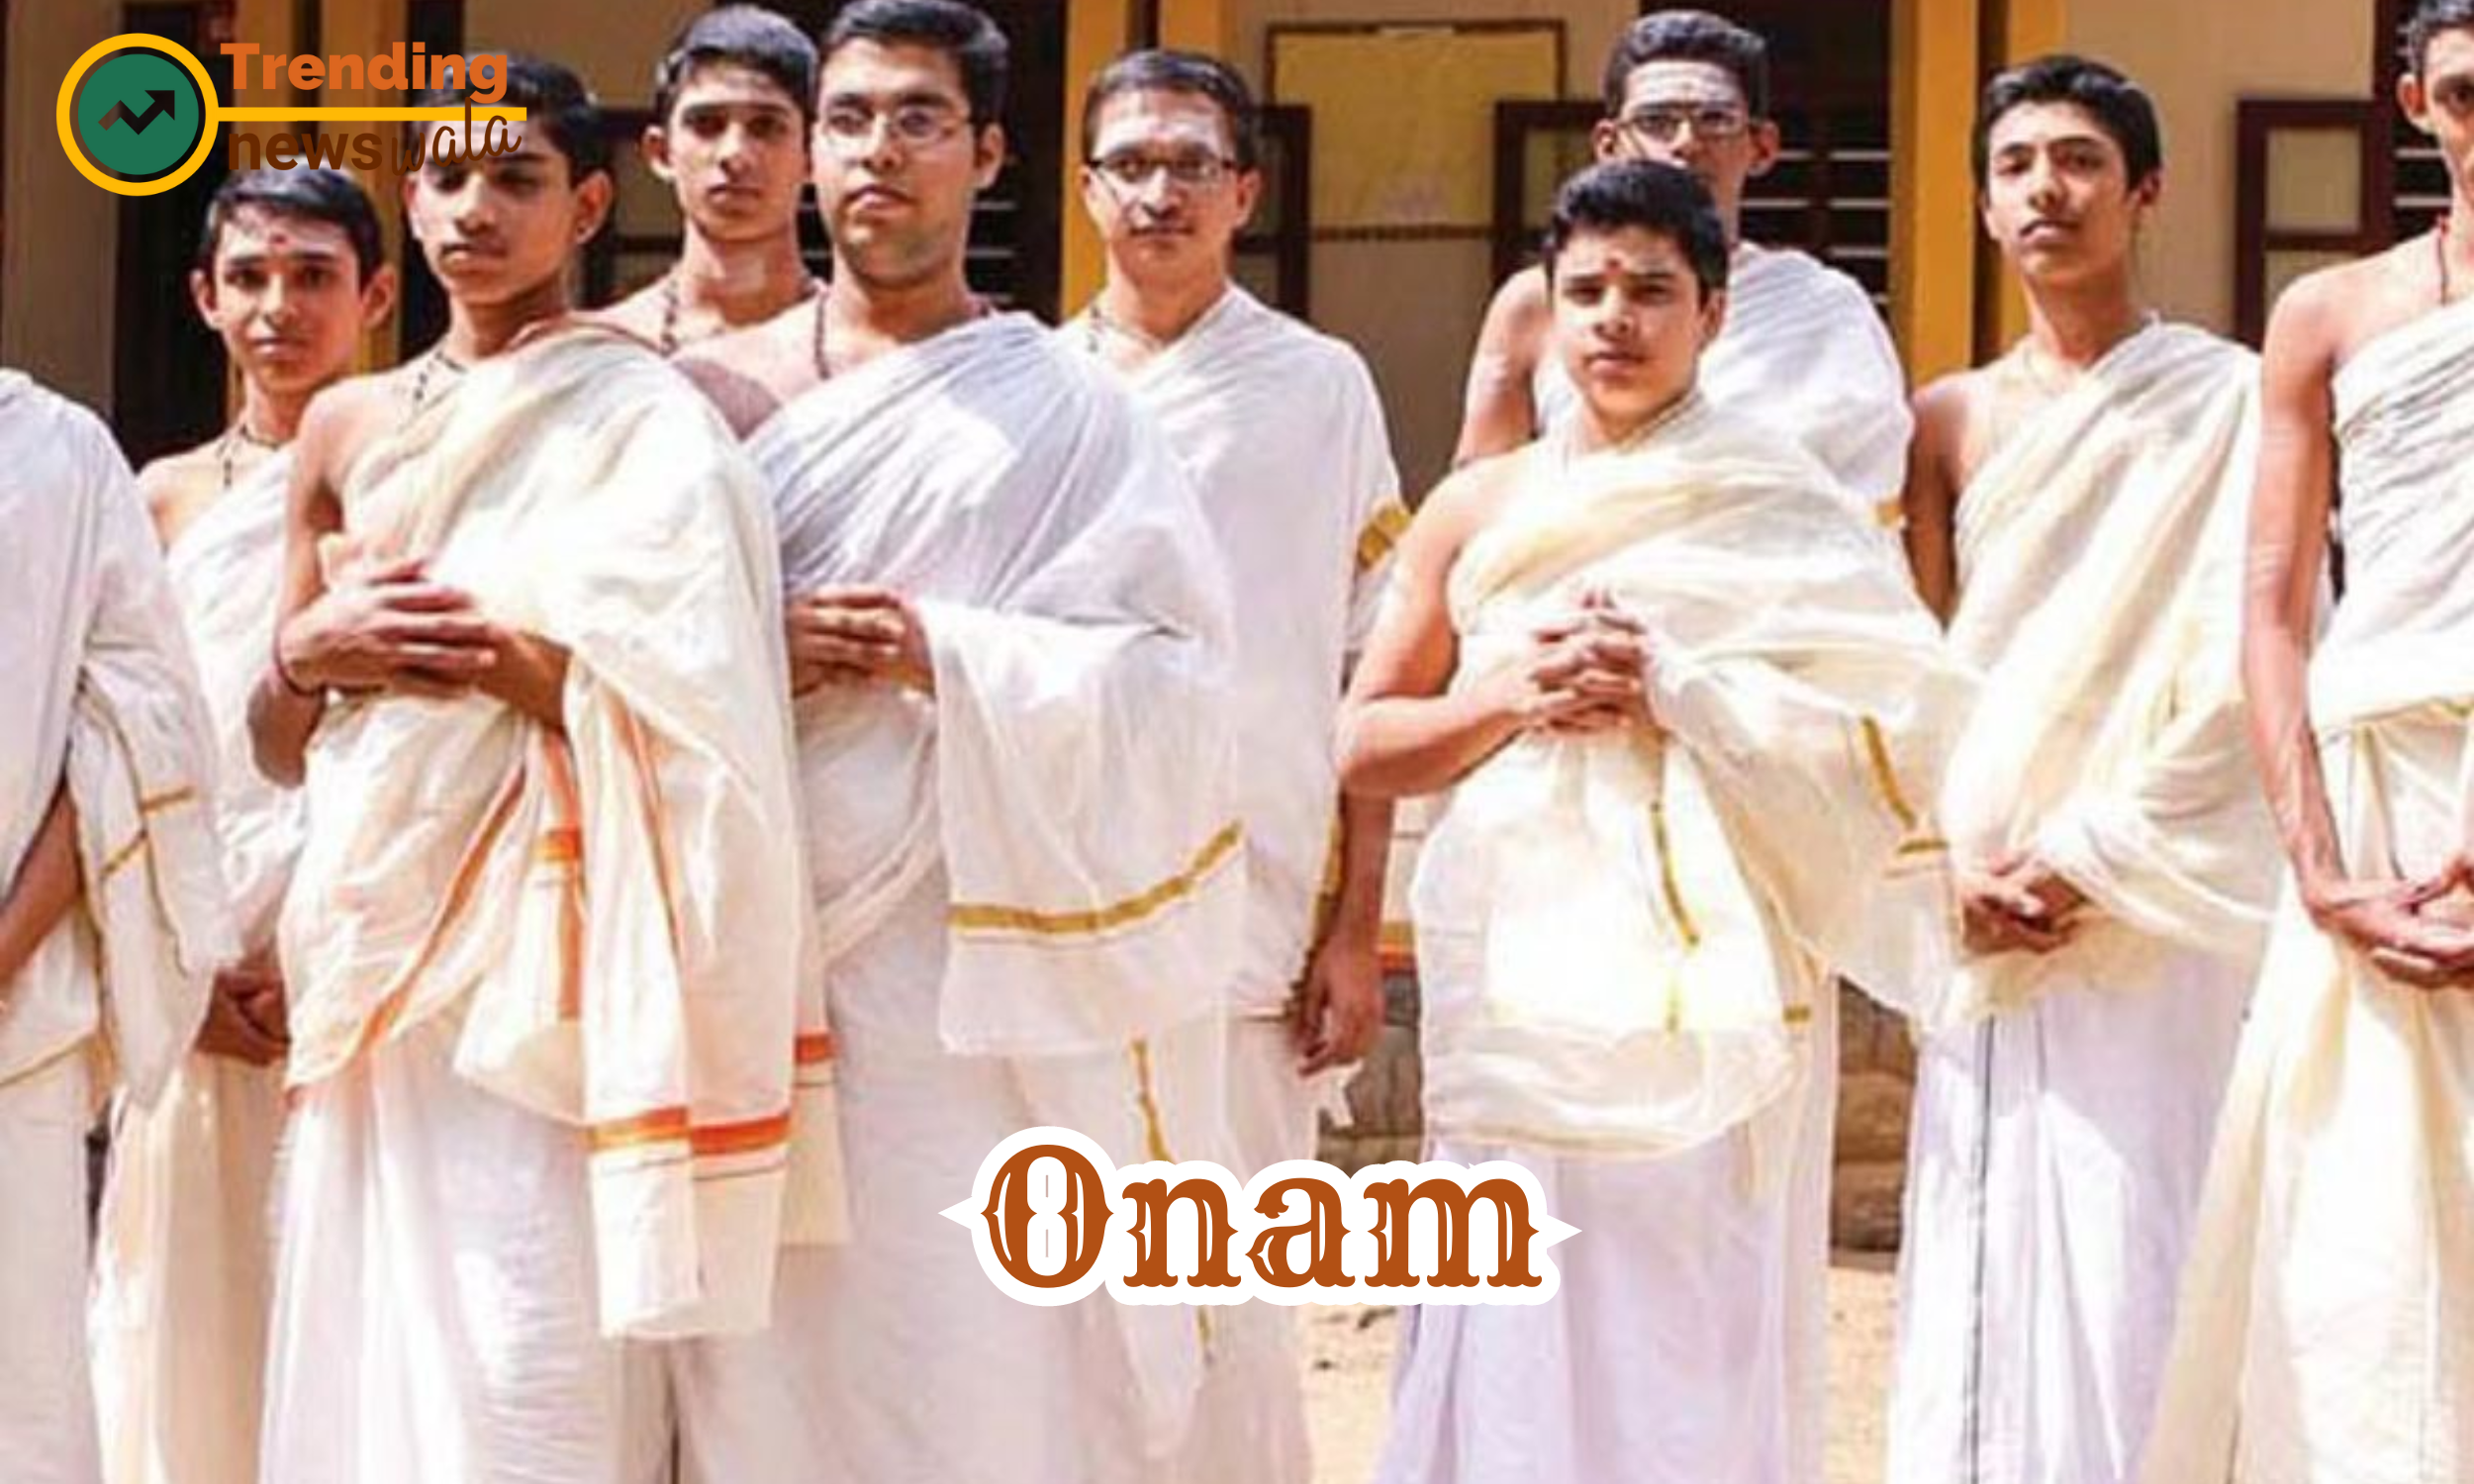 An alternative traditional attire for Onam in Kerala, particularly for men, similar to a dhoti